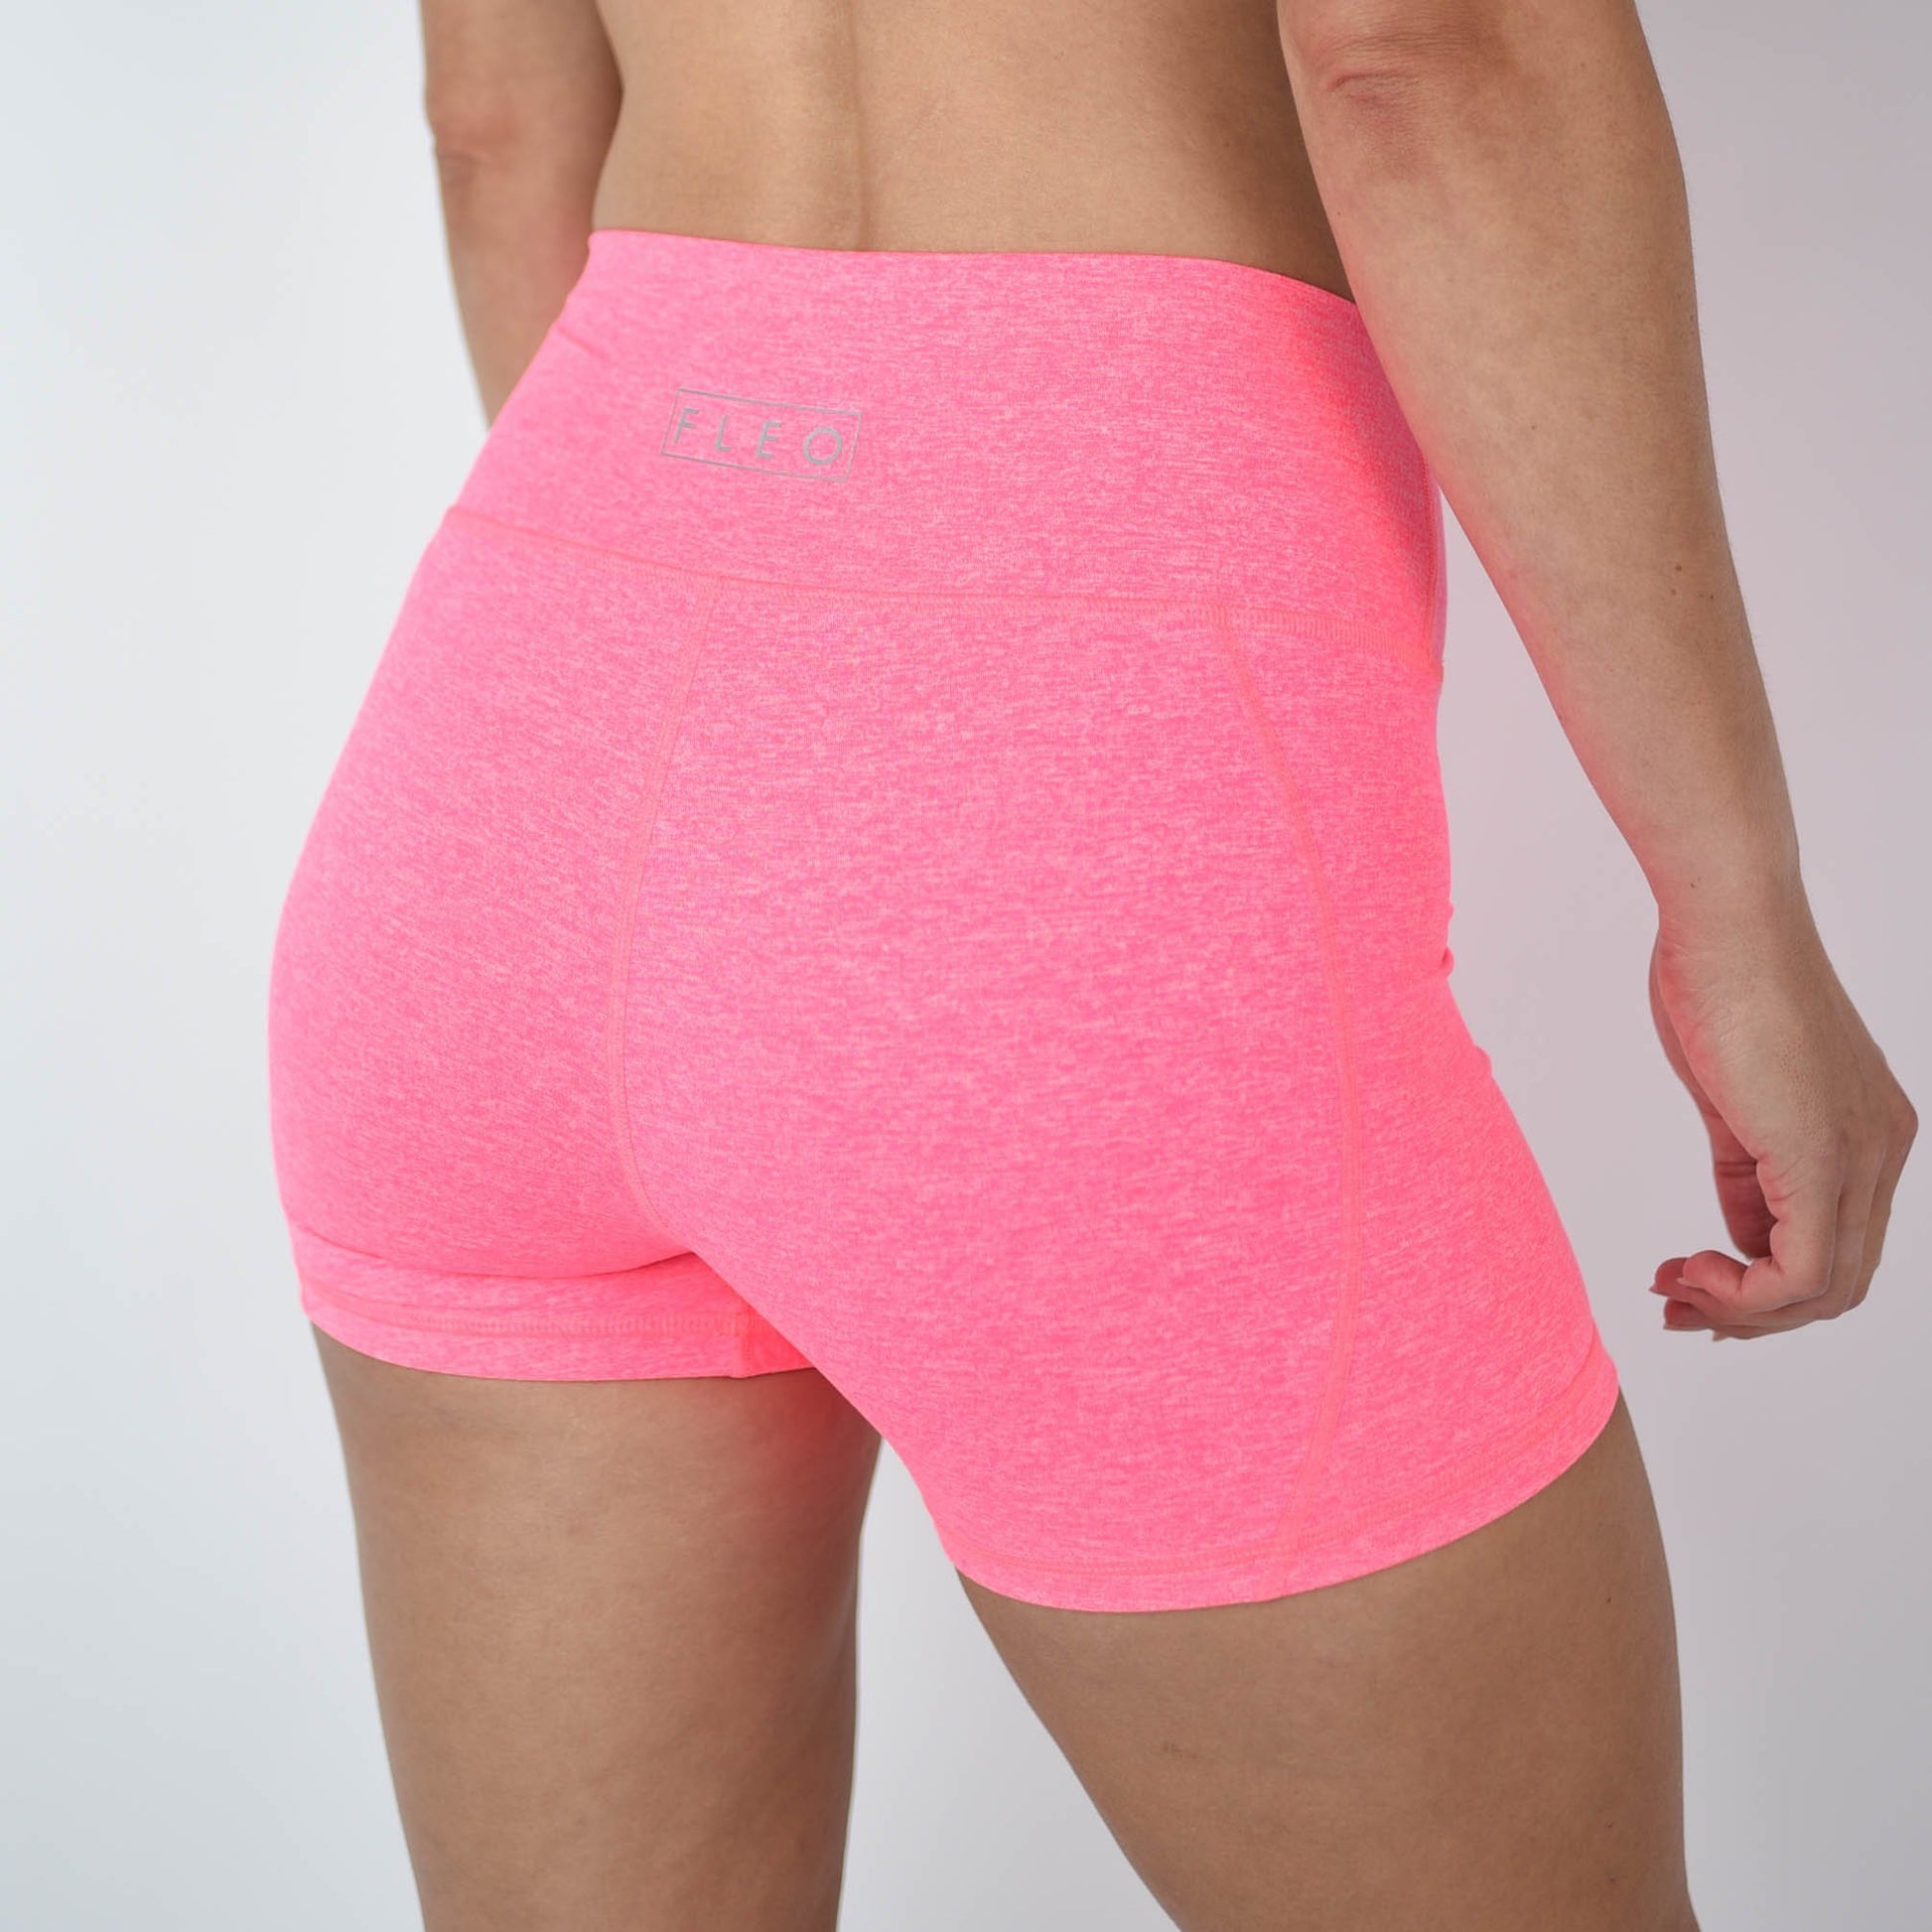 FLEO Electric Heather Pink Shorts (True High Contour) - 9 for 9